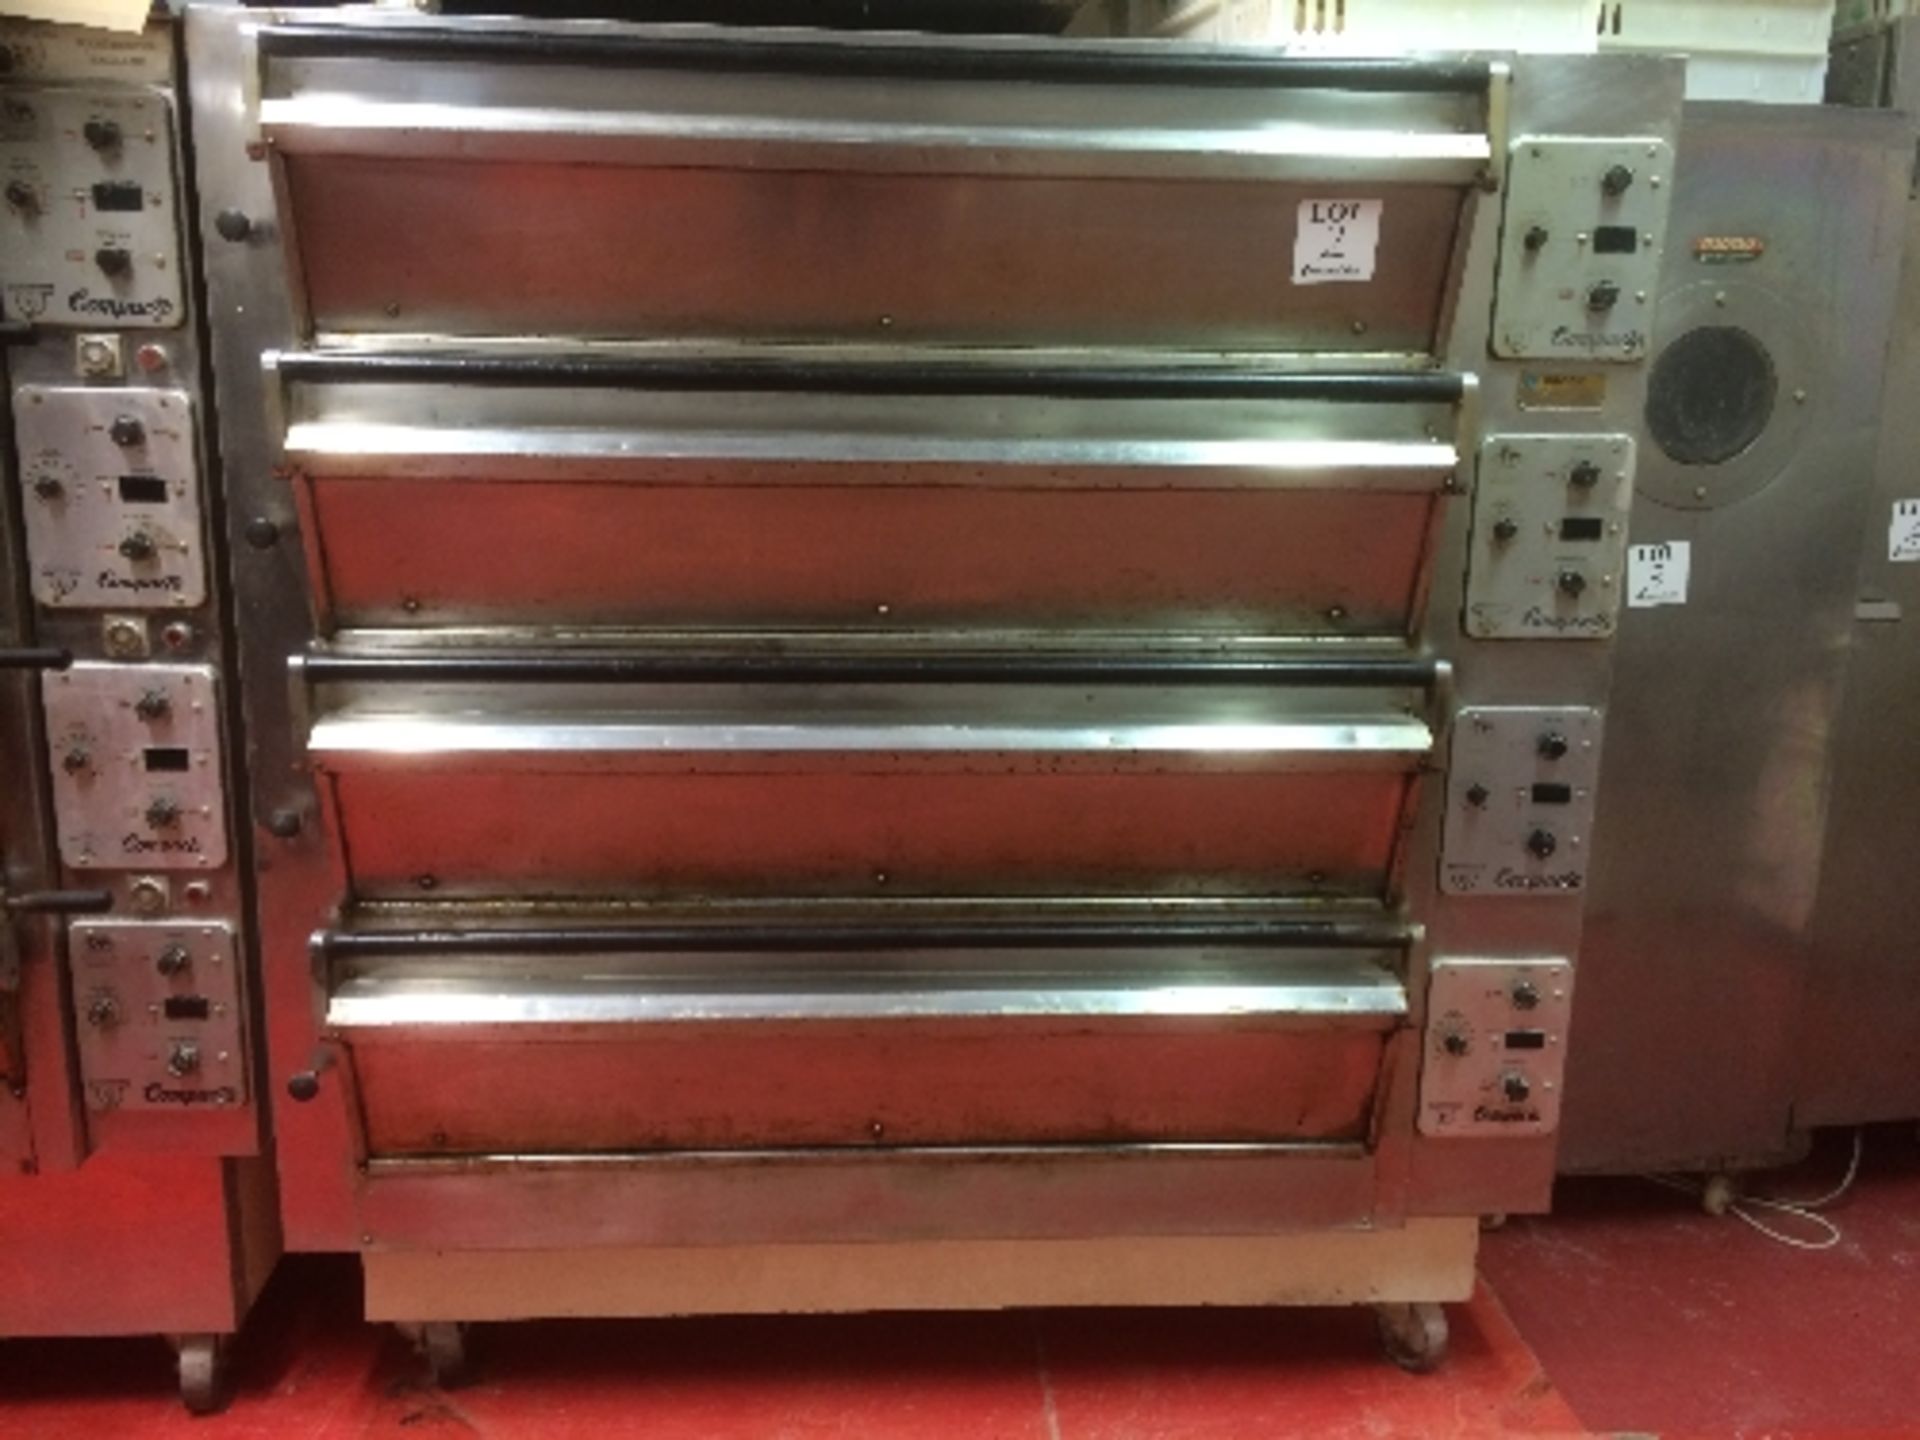 Tom Chandley Compacta four tier deck oven (12 tray, high crown)